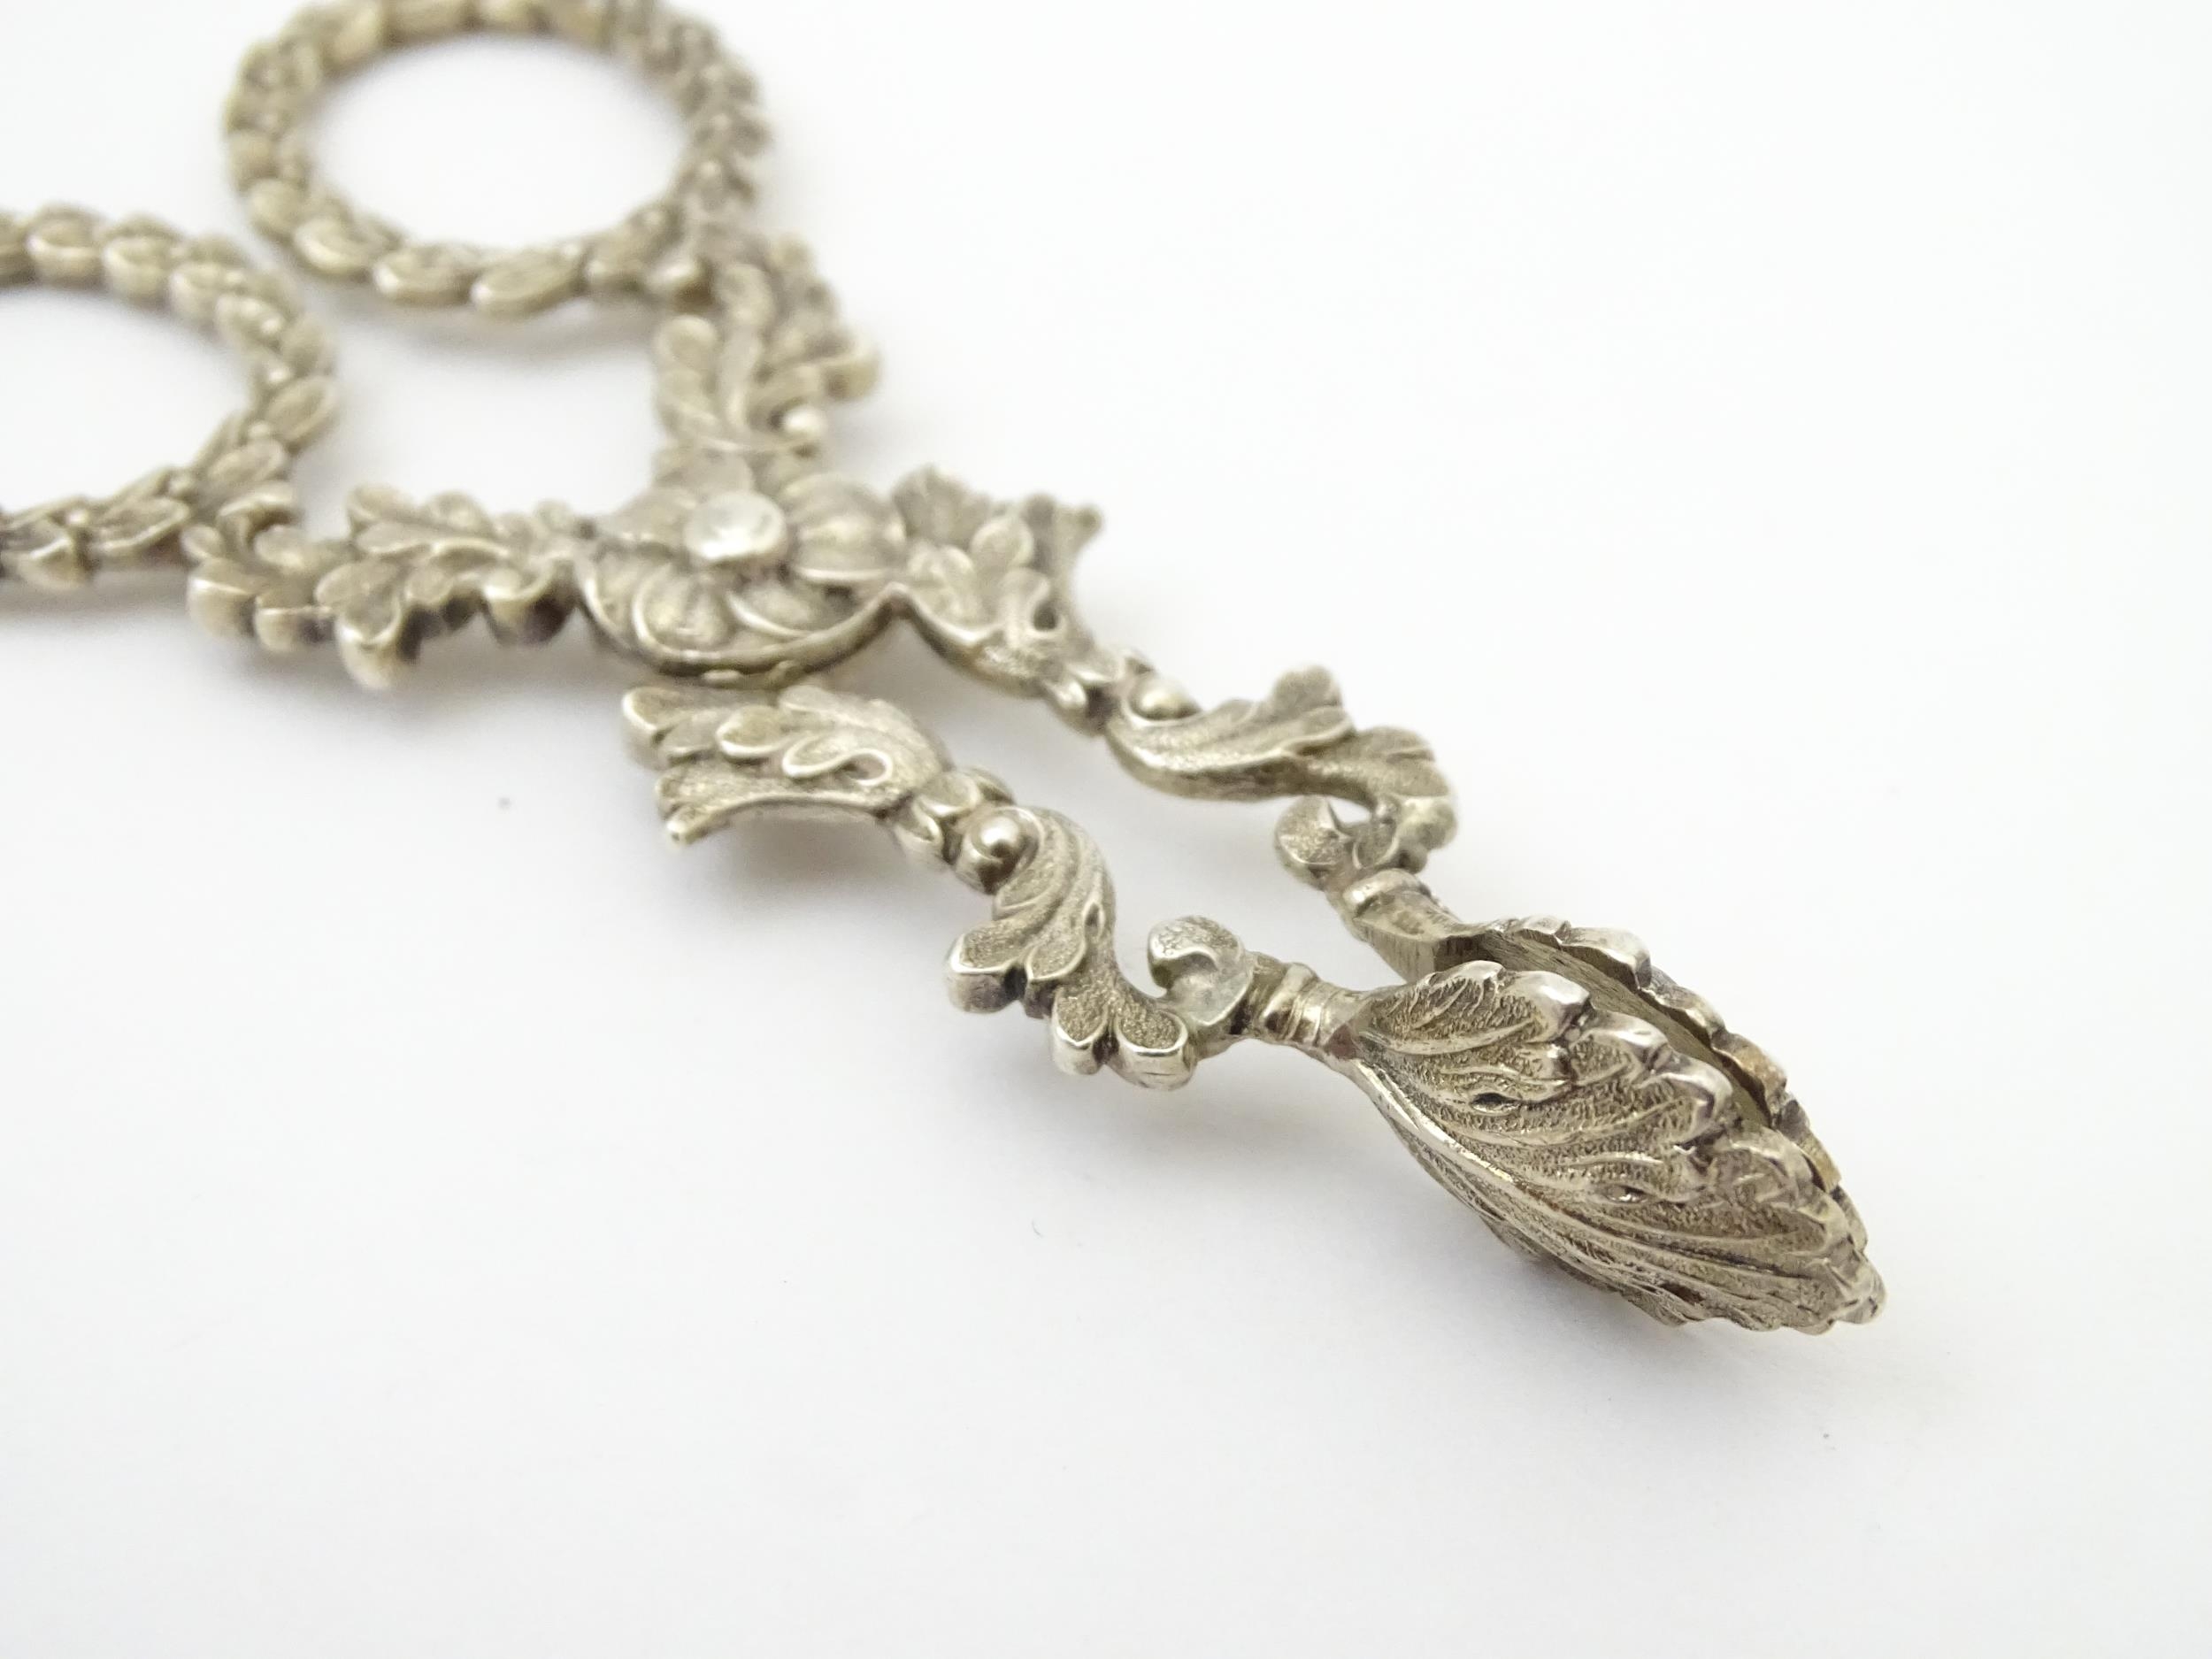 William IV silver sugar nips with foliate detail and laurel chaplet formed handles, hallmarked - Image 2 of 8